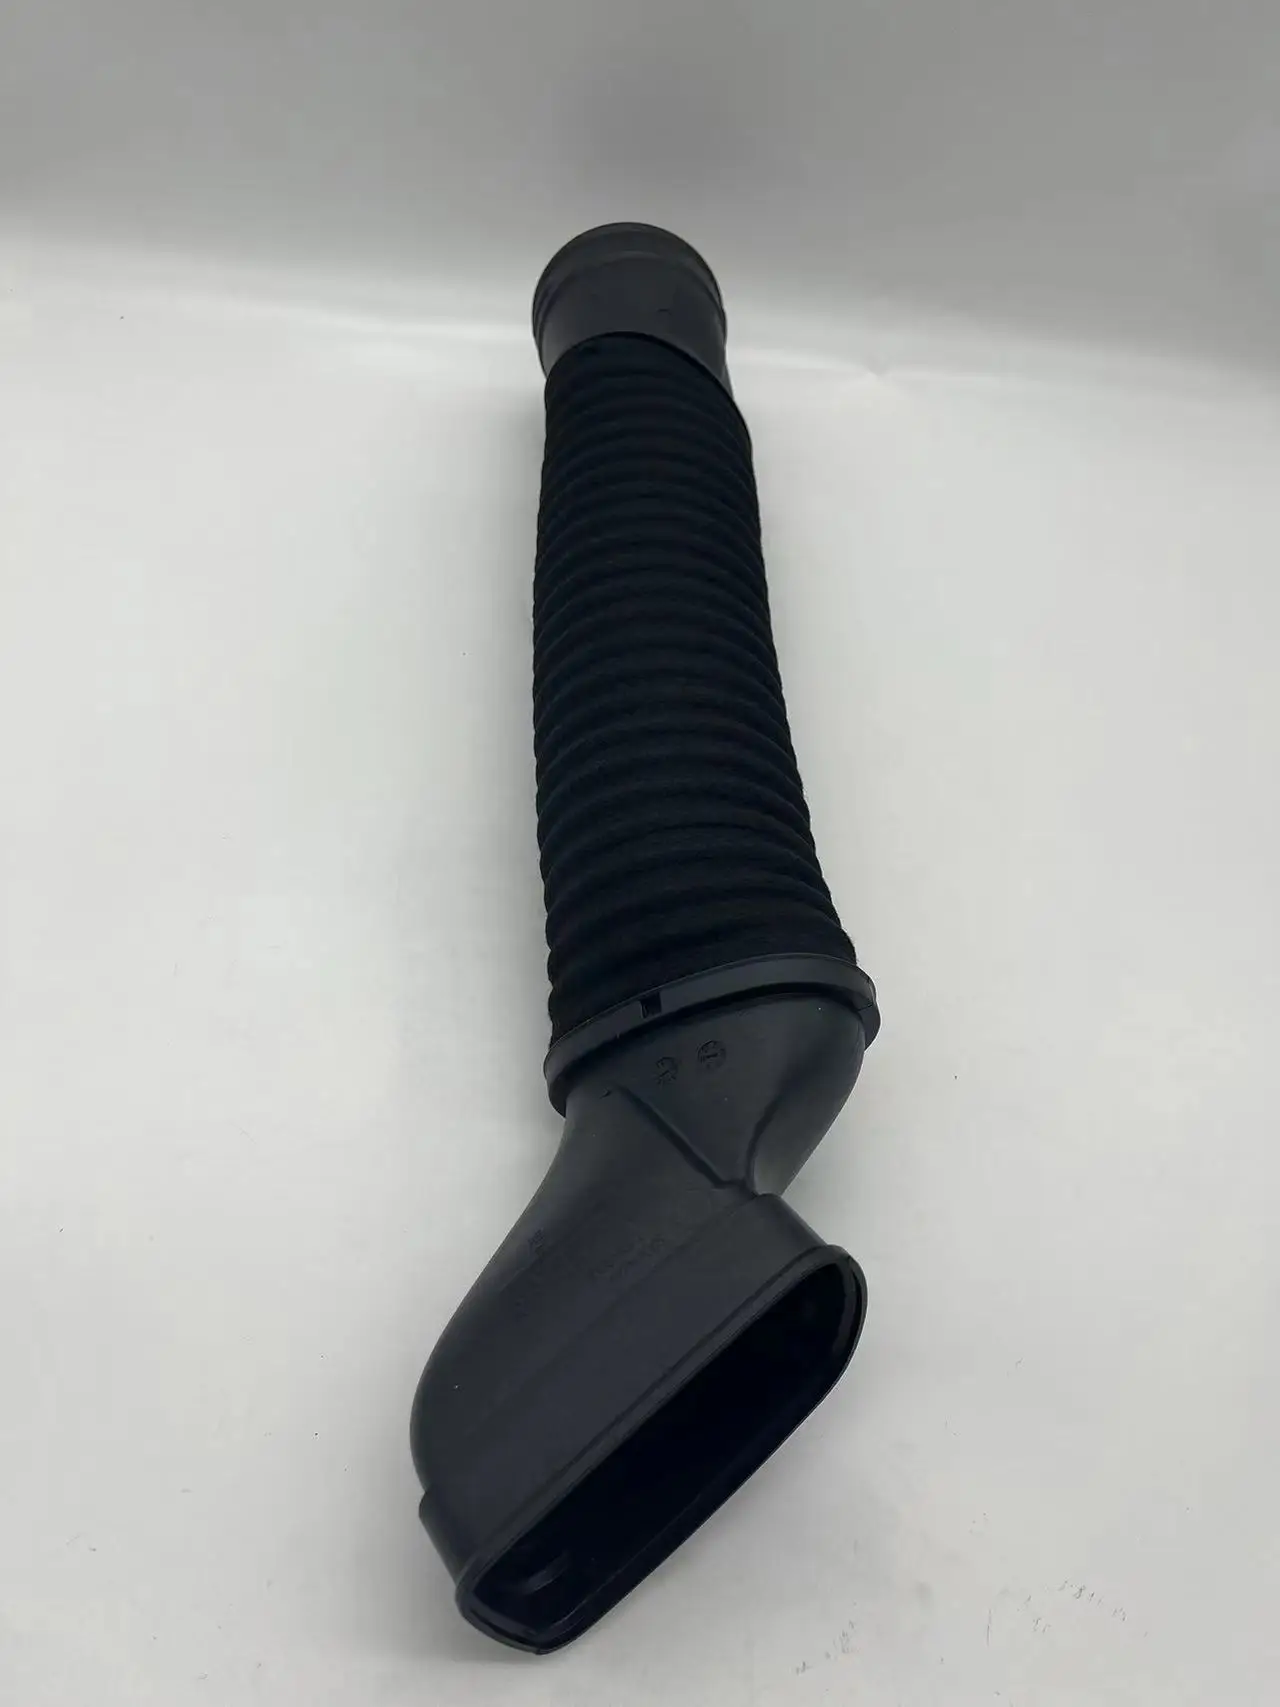 OE; A2730900382 A2730900282 For Left Right Air Intake Hose of Mercedes Benz M273 Engine W221 S450 S500